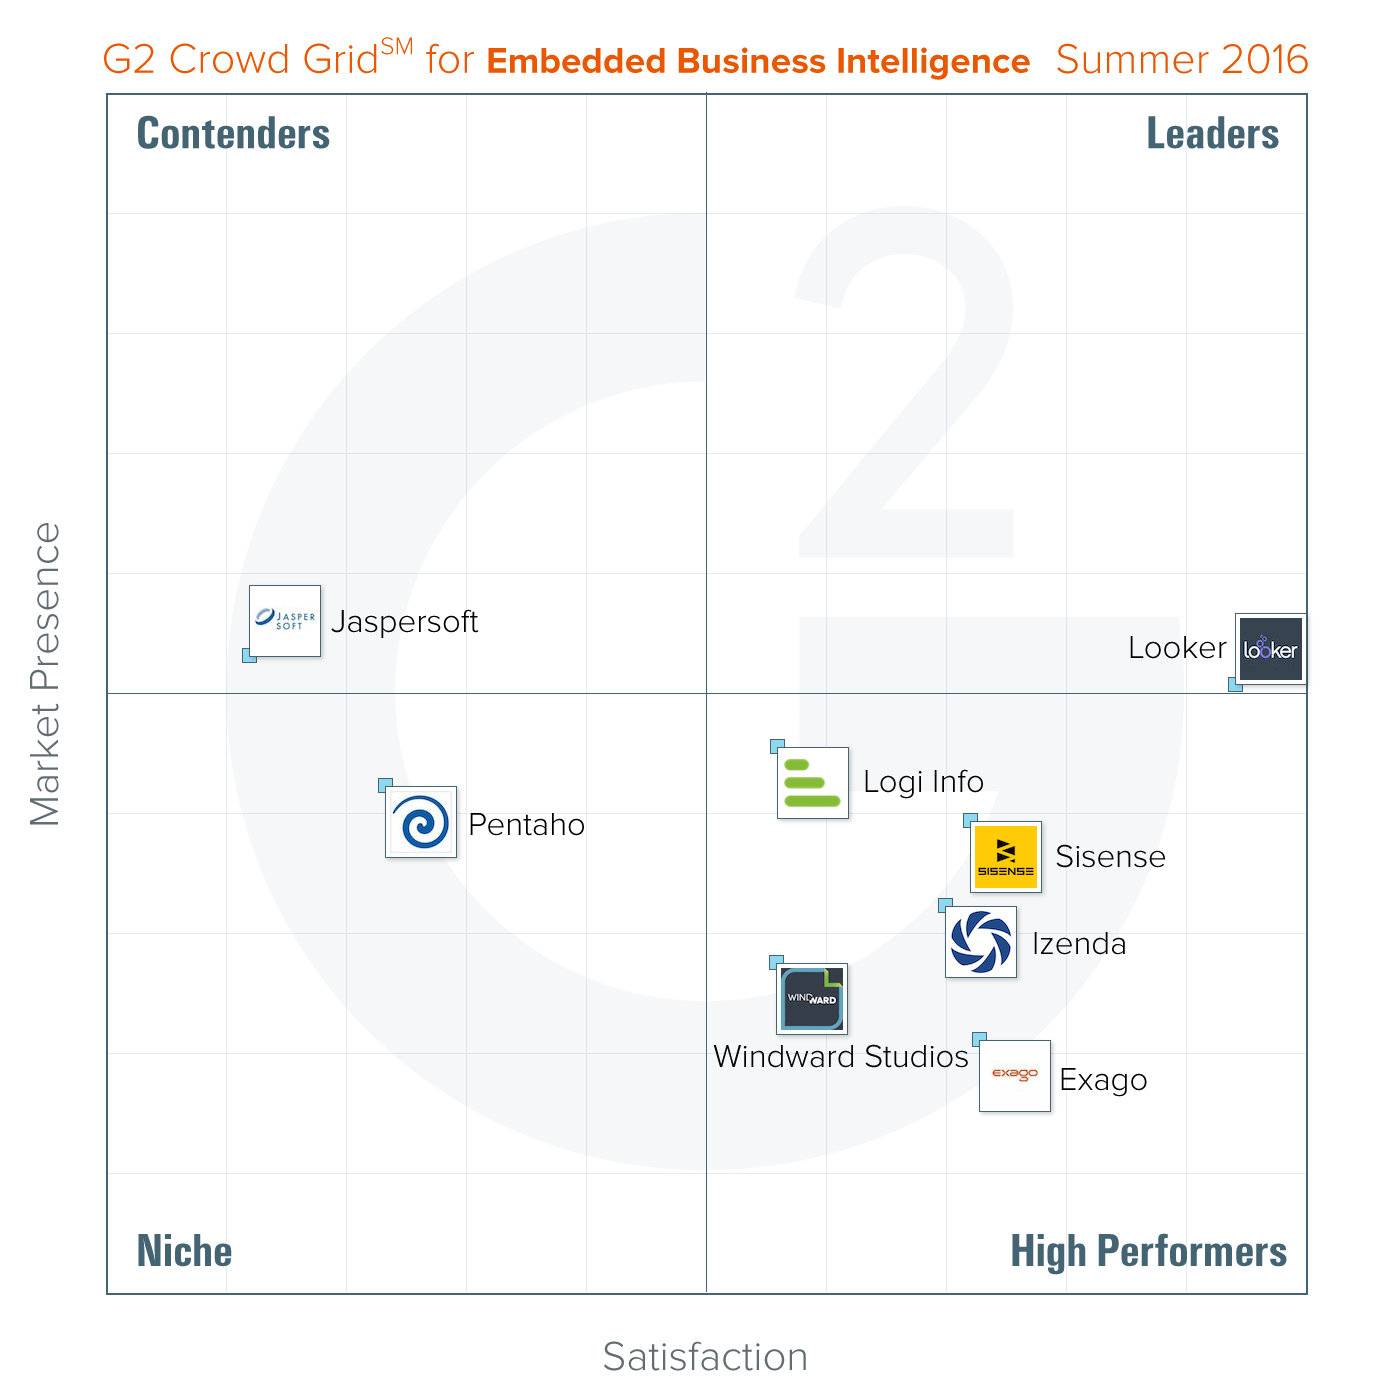 g2-crowd-names-izenda-as-a-high-performer-in-embedded-self-service-business-intelligence-grids